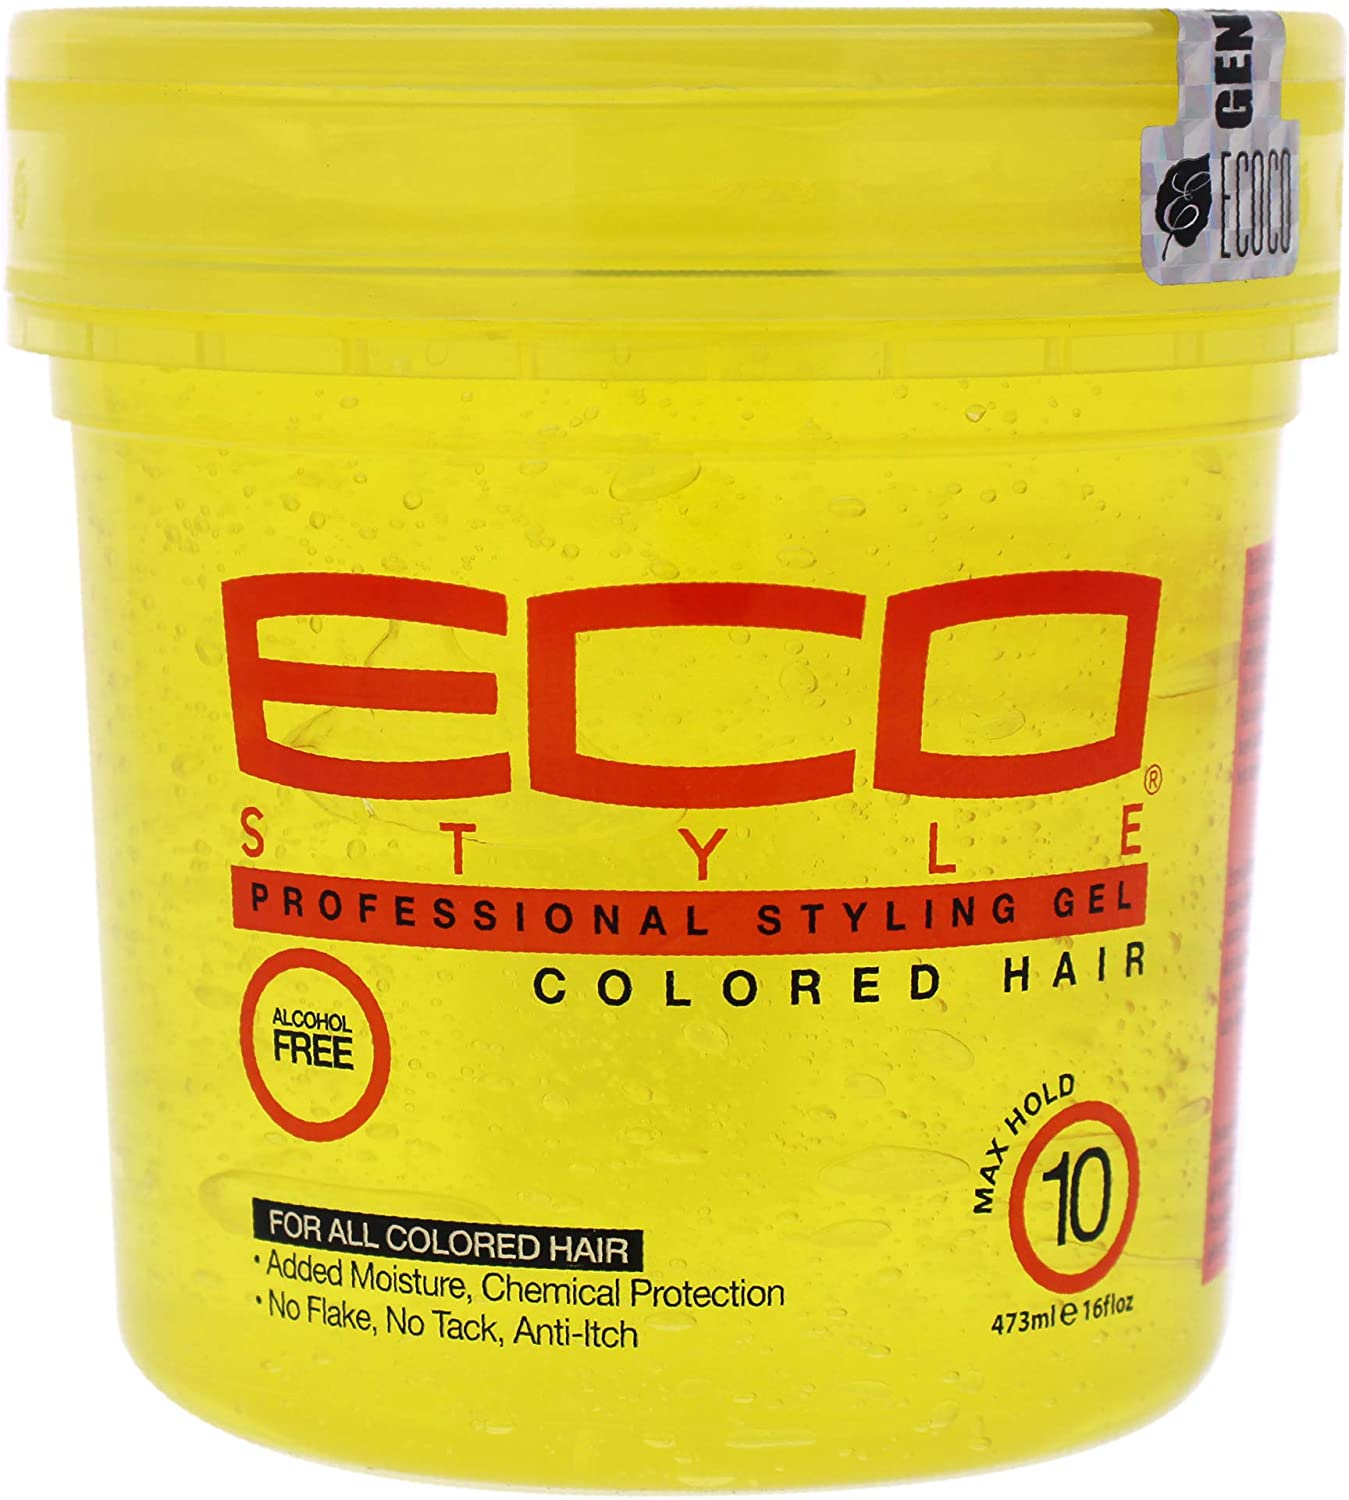 Eco Styler Professional Colored Hair Styling Gels